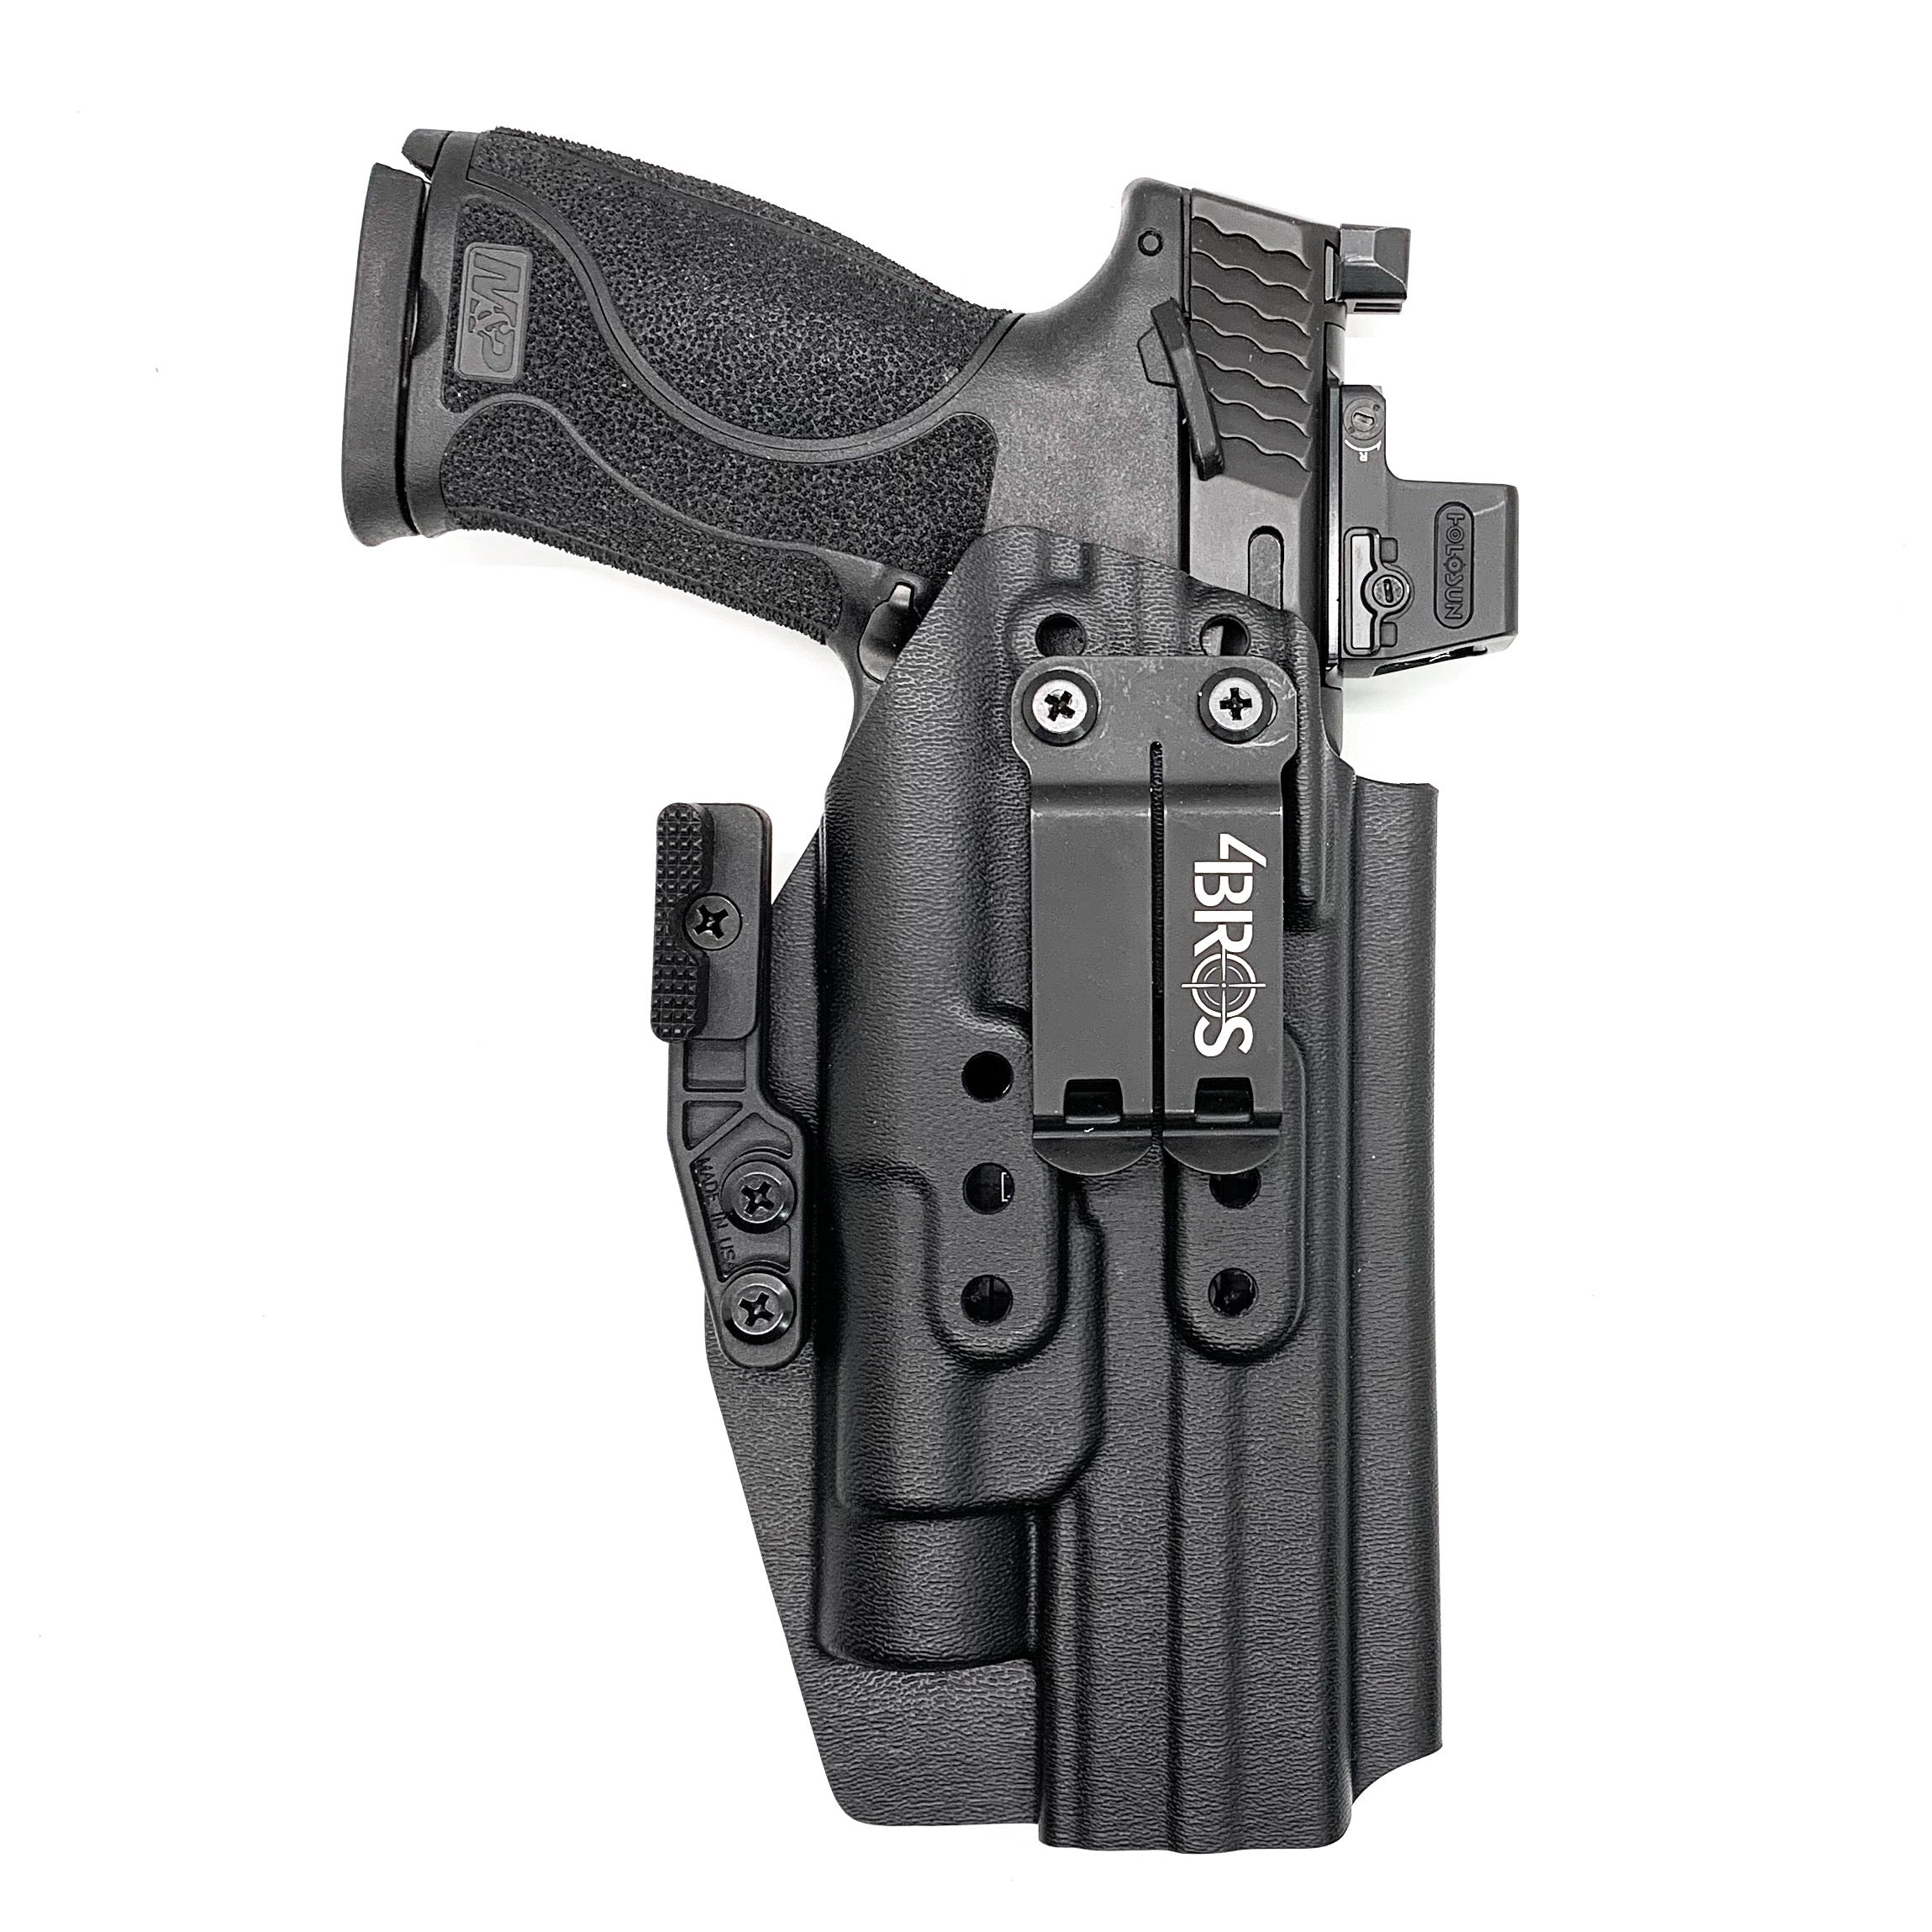 For the Best IWB AIWB Inside Waistband Kydex Taco Holster designed to fit the Smith and Wesson M&P 5.6" Performance Center 10MM M2.0 pistol with thumb safety & TLR-1, shop Four Brothers Holsters.  Full sweat guard, adjustable retention, profiled for a red dot sight. Made in the USA for veterans and law enforcement. 